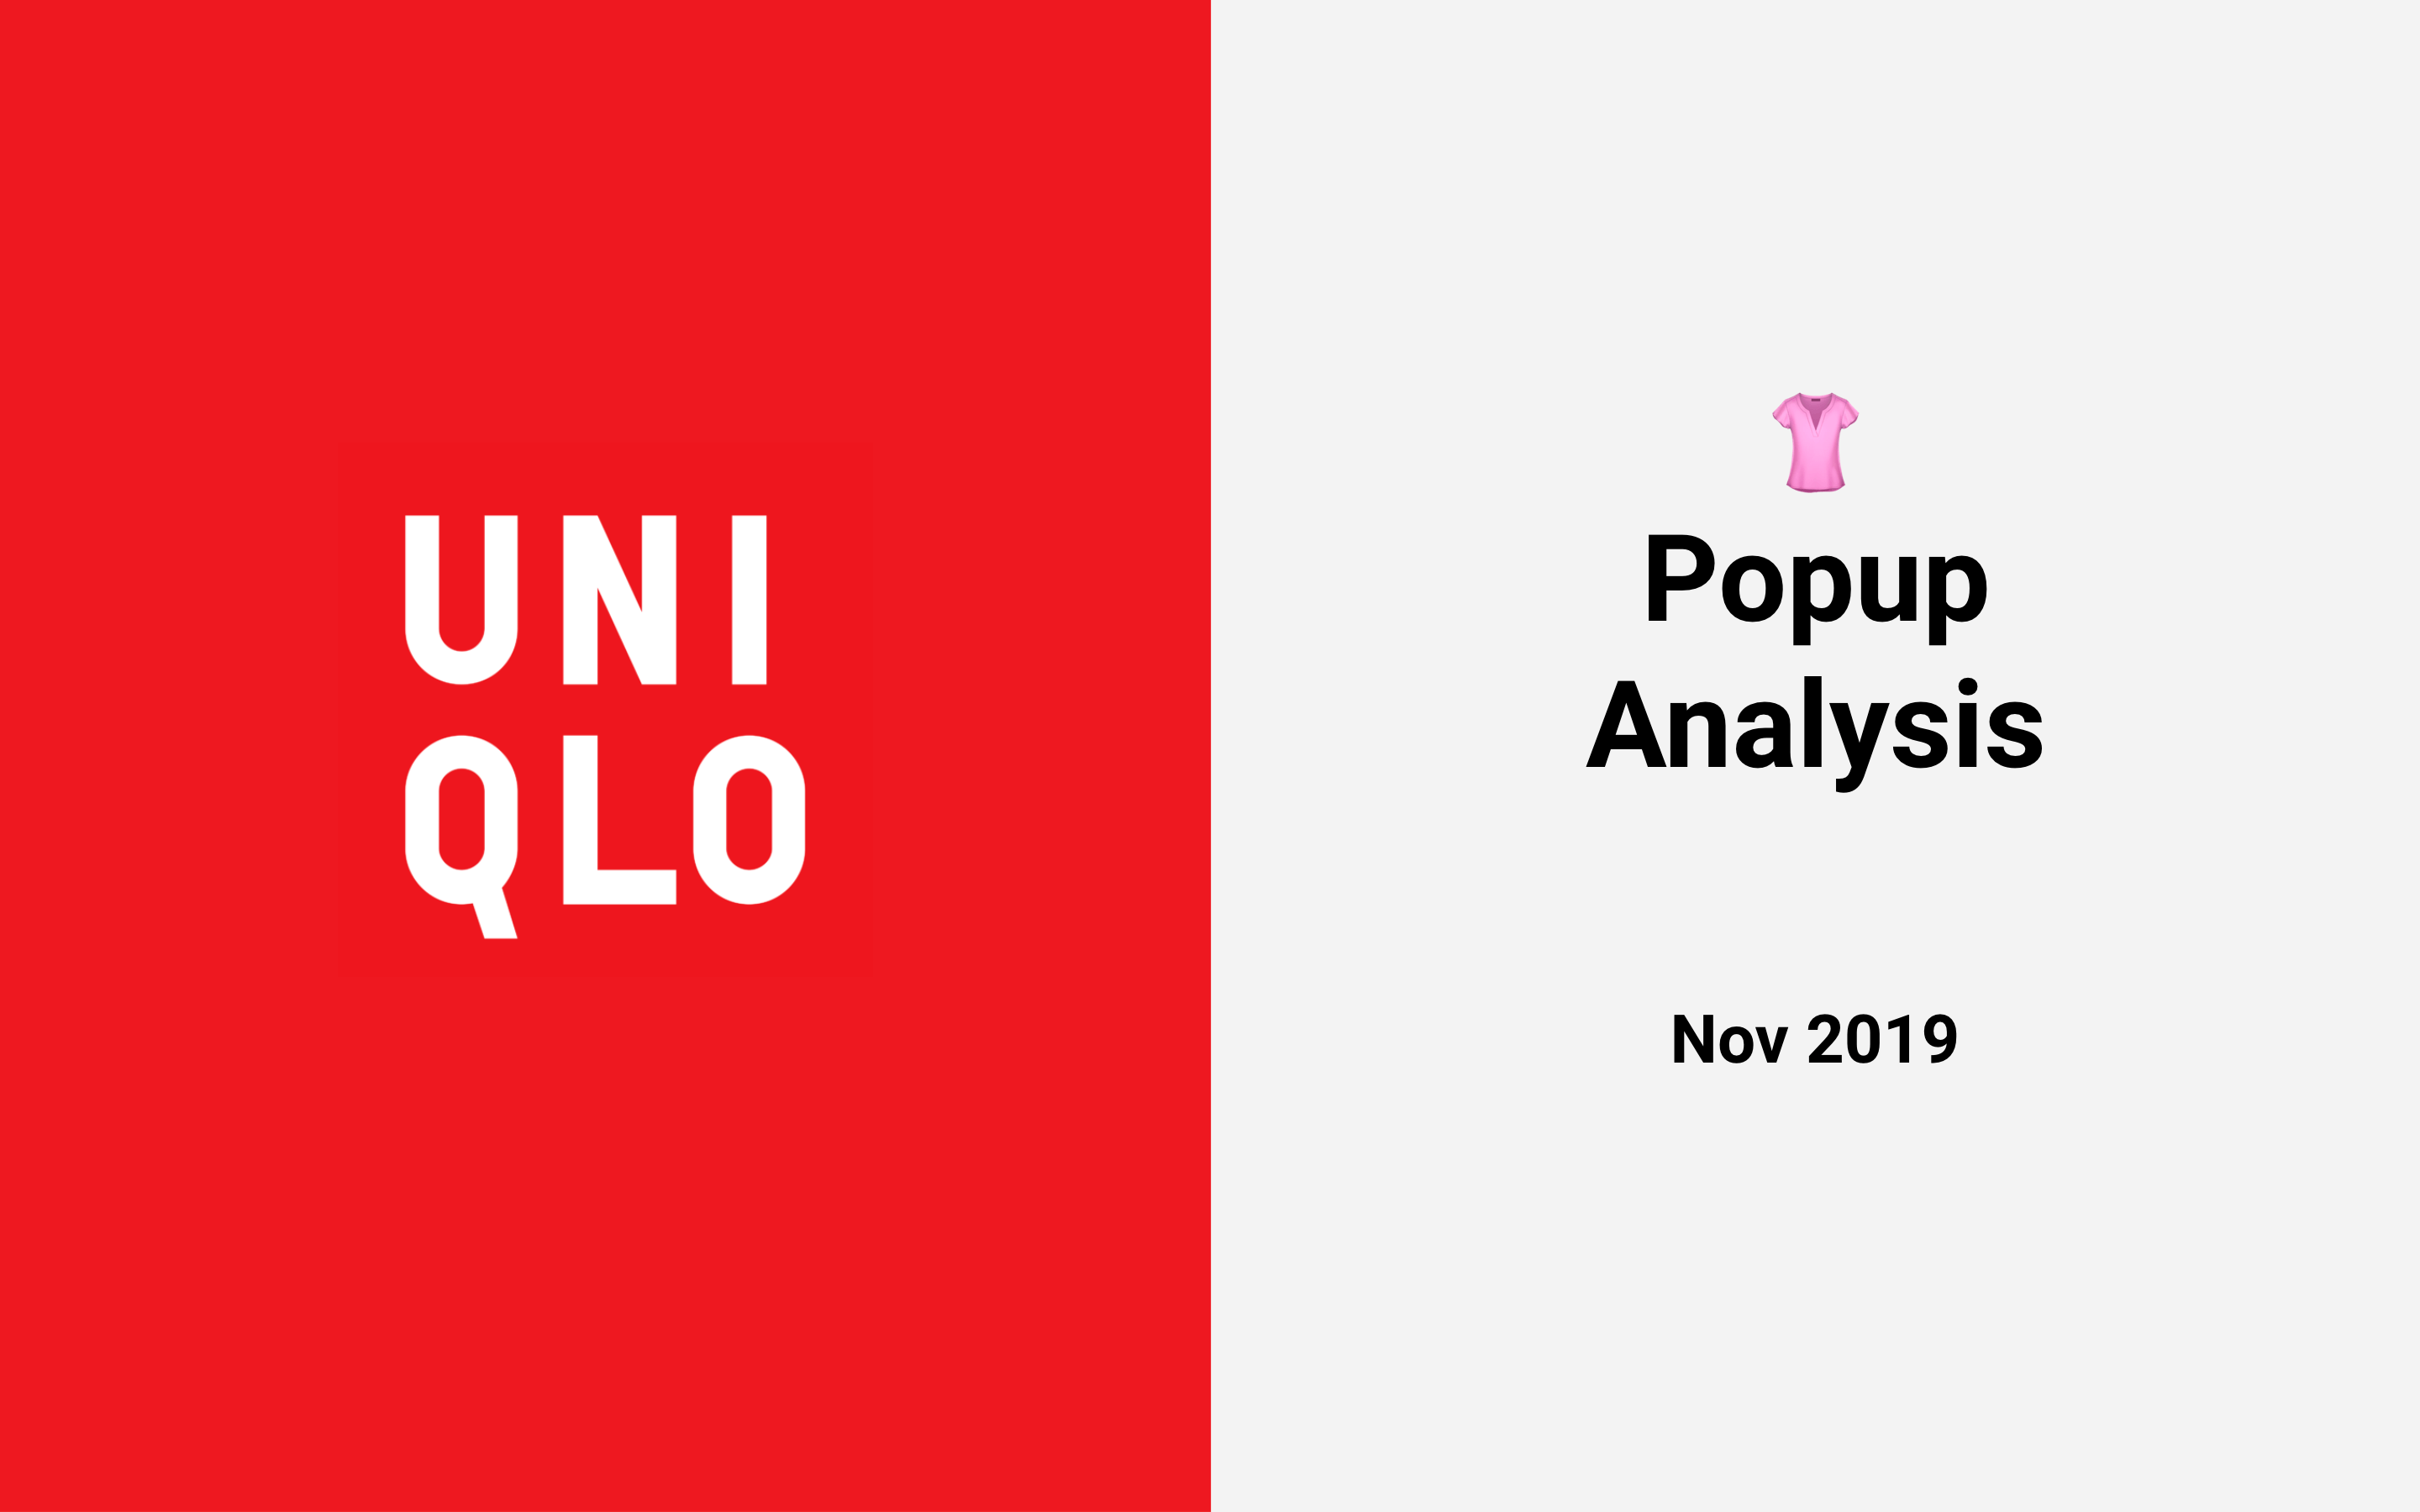 How does UNIQLO increase sales through social sharing?